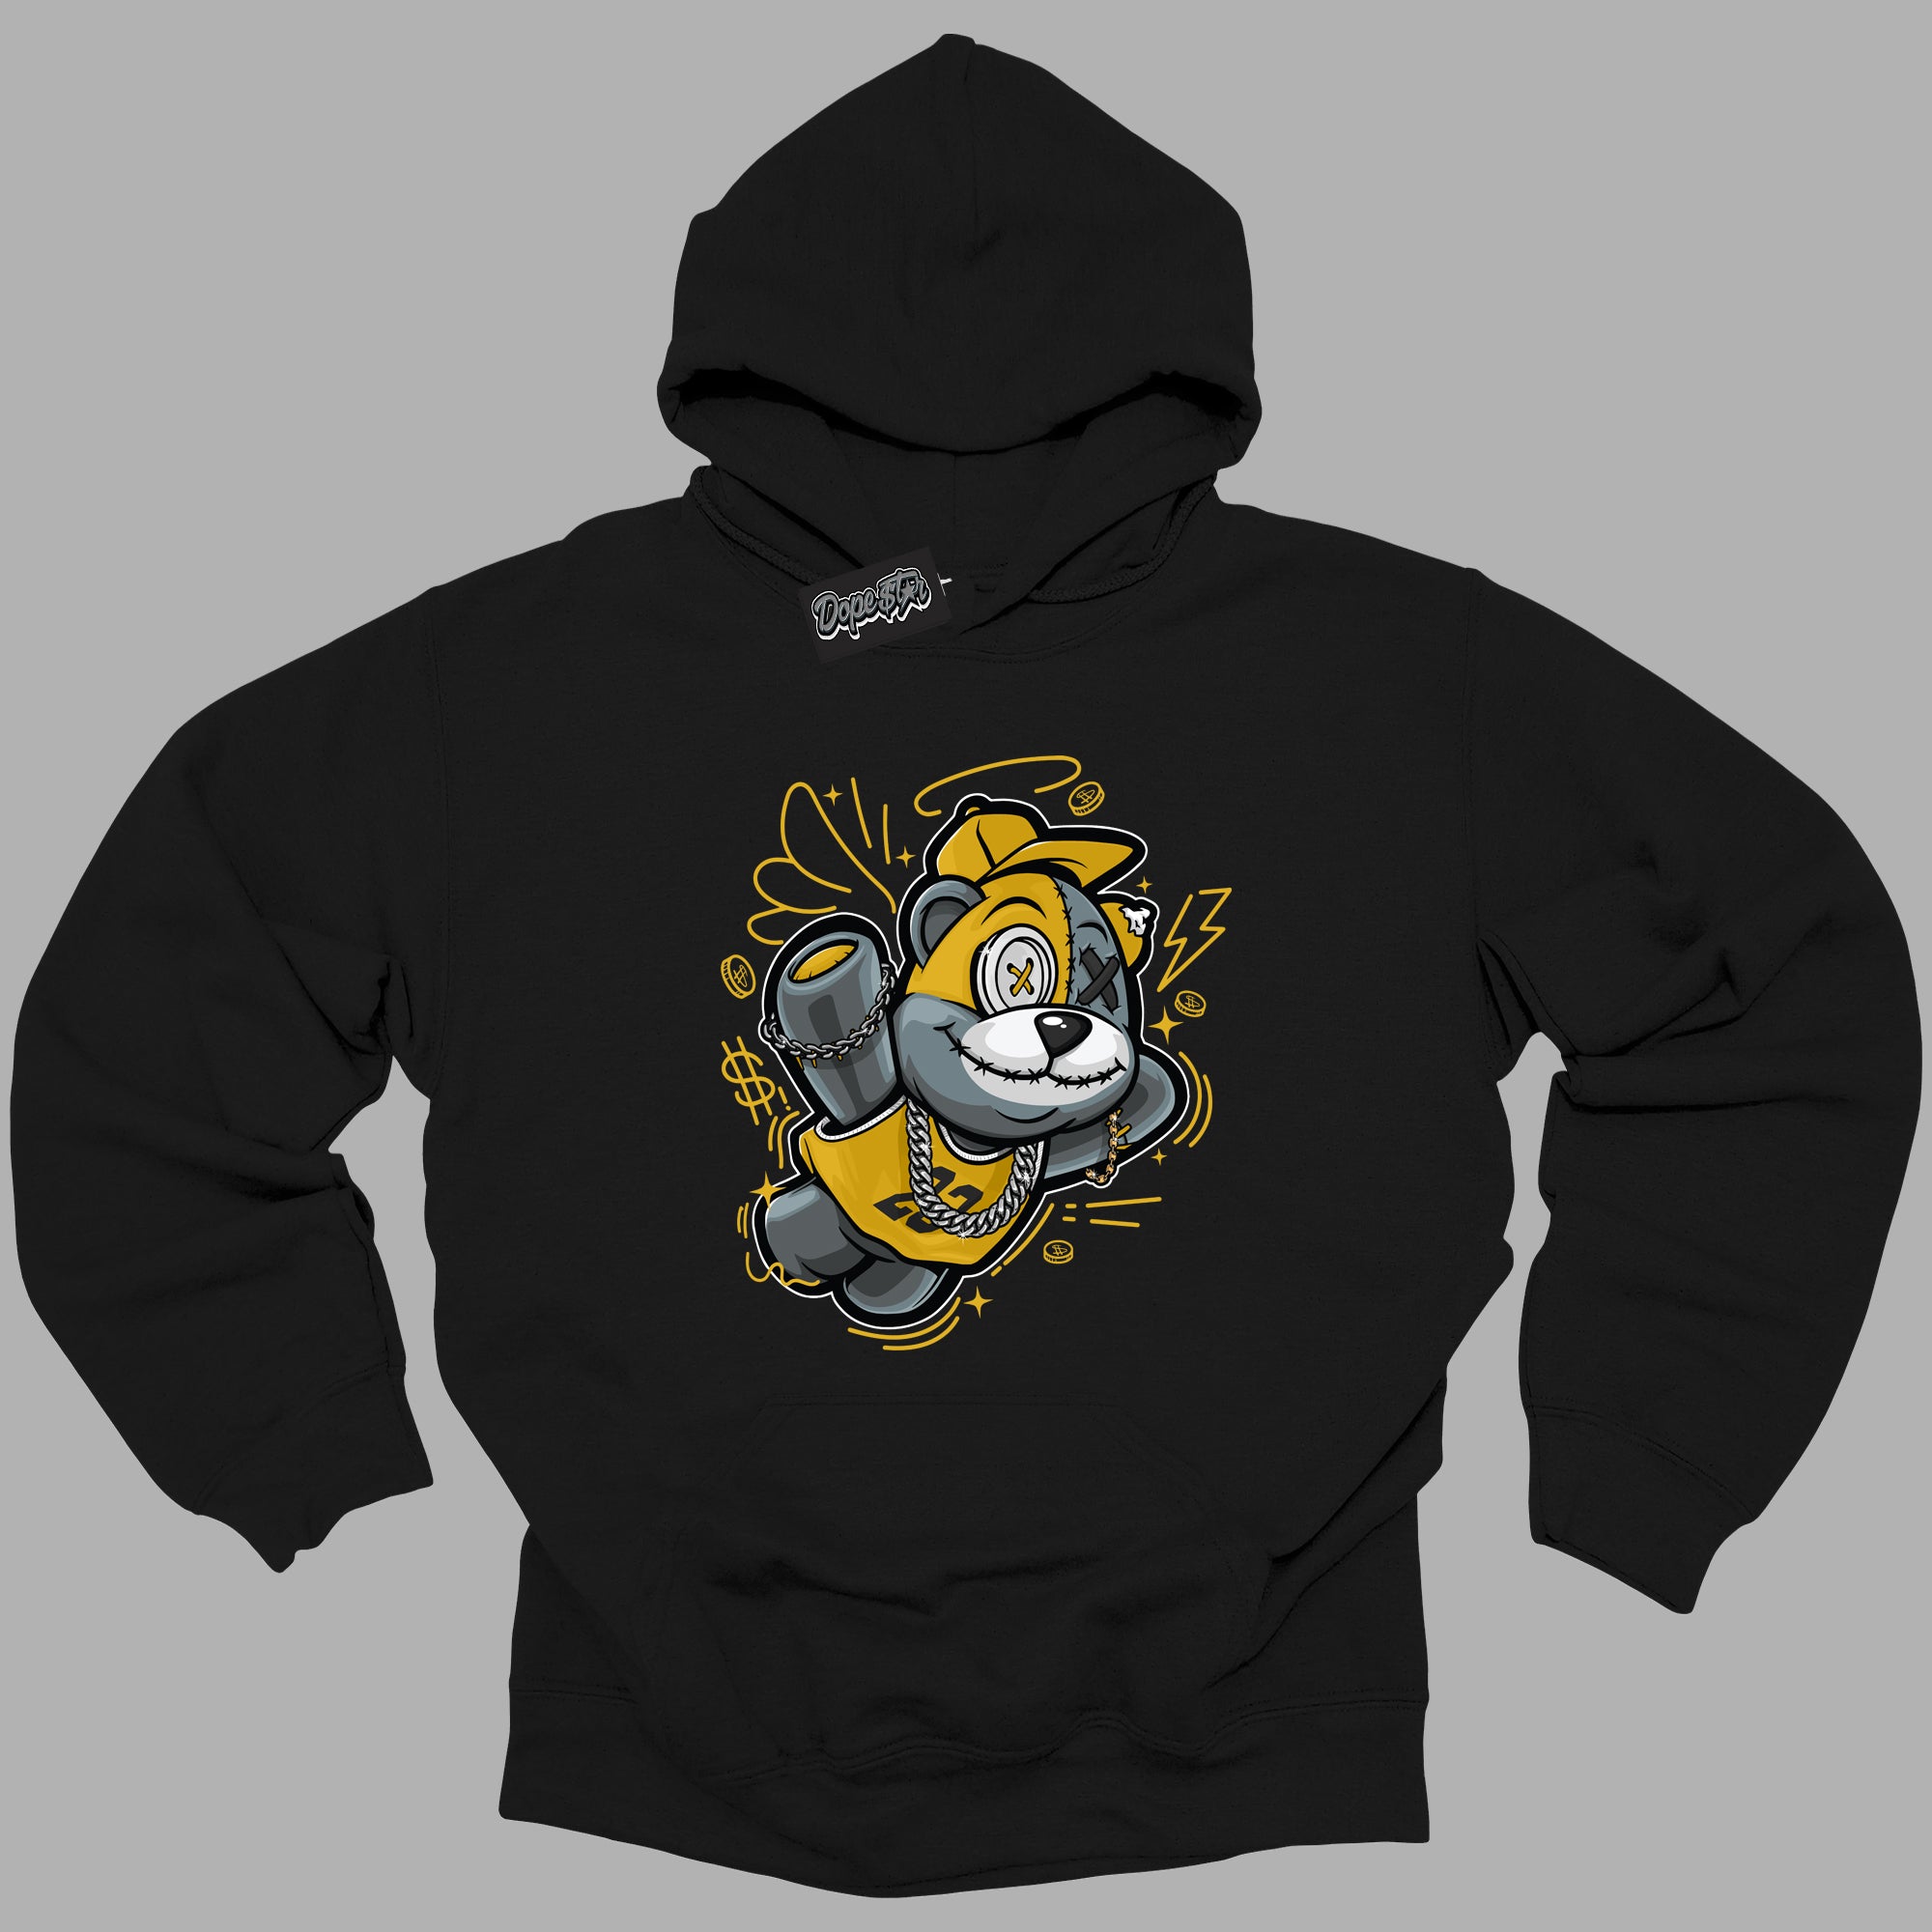 Cool Black Hoodie with “ Slam Dunk Bear ”  design that Perfectly Matches Yellow Ochre 6s Sneakers.